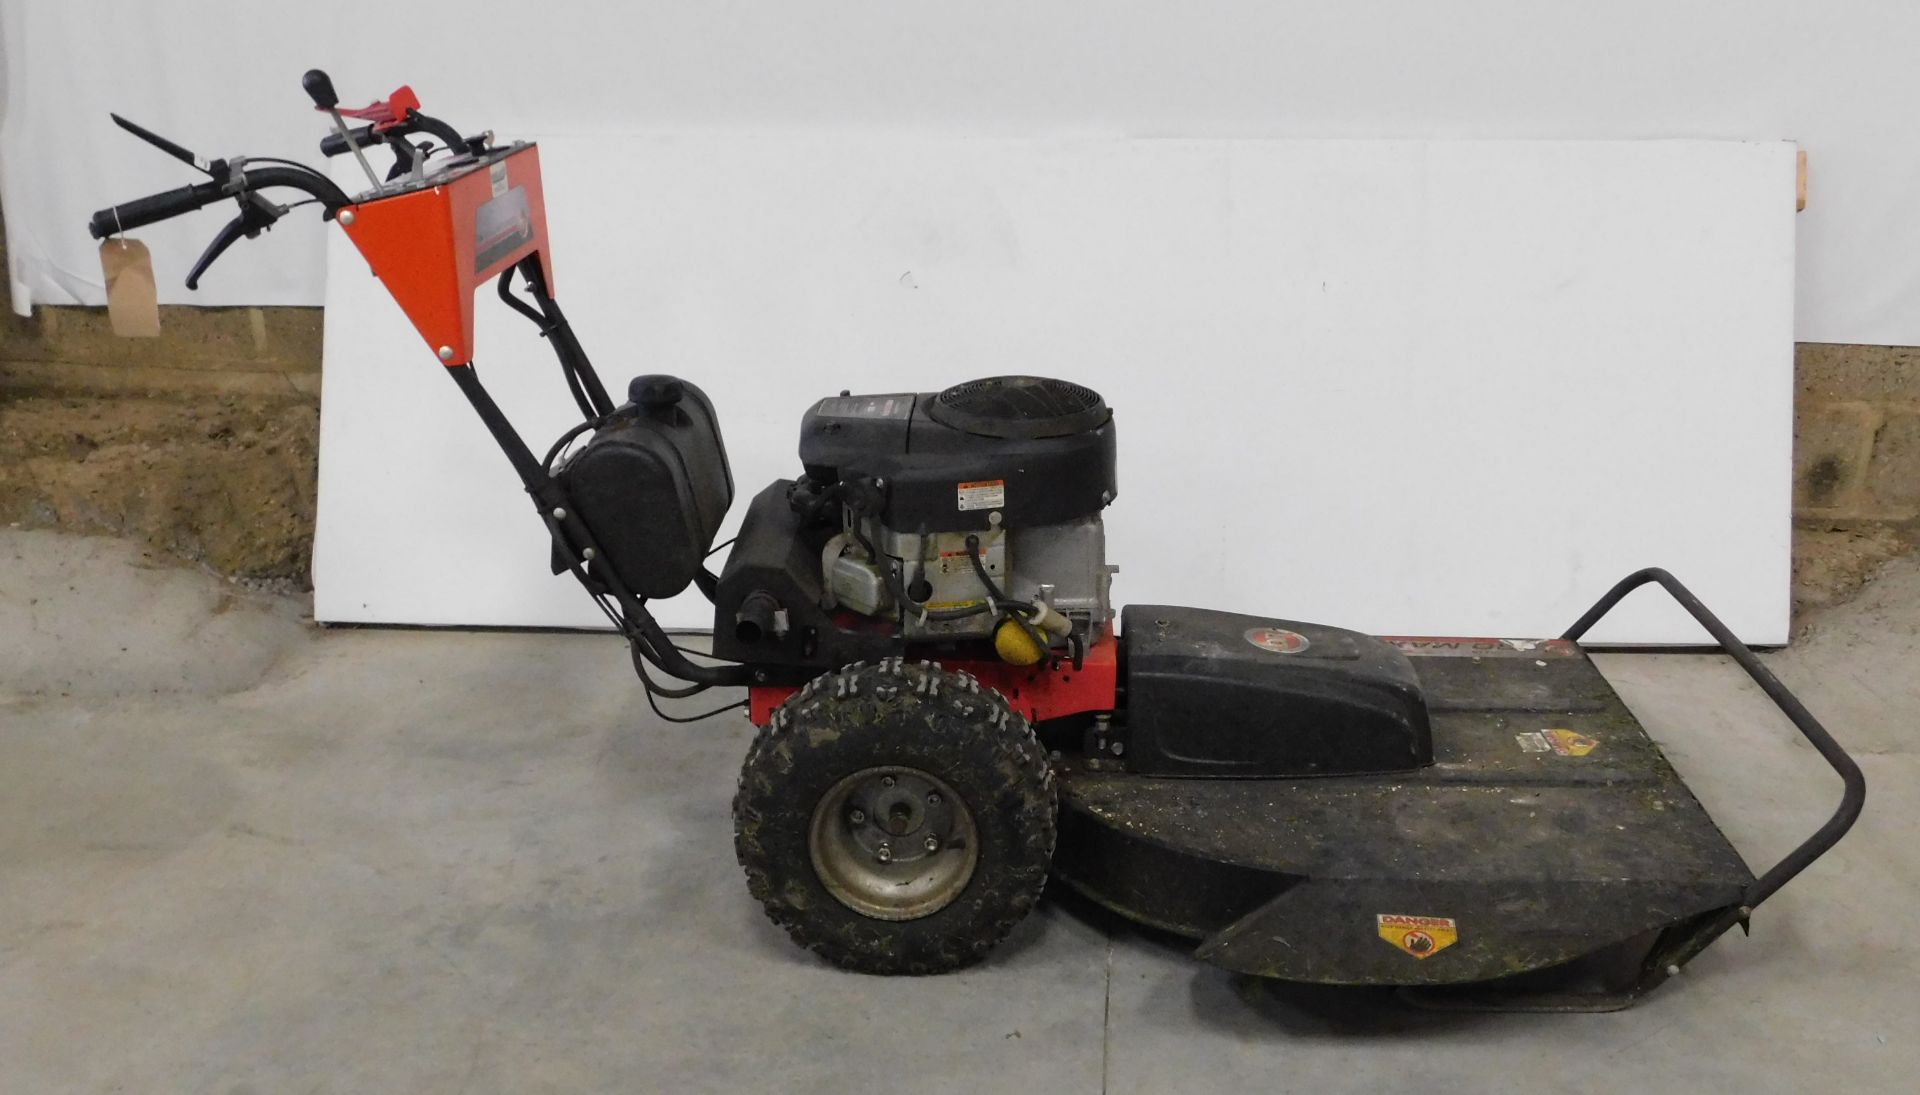 DR All Terrain Pro Max-34 Field & Brush Mower, Serial Number 3005428329 with Briggs & Stratton 656cc